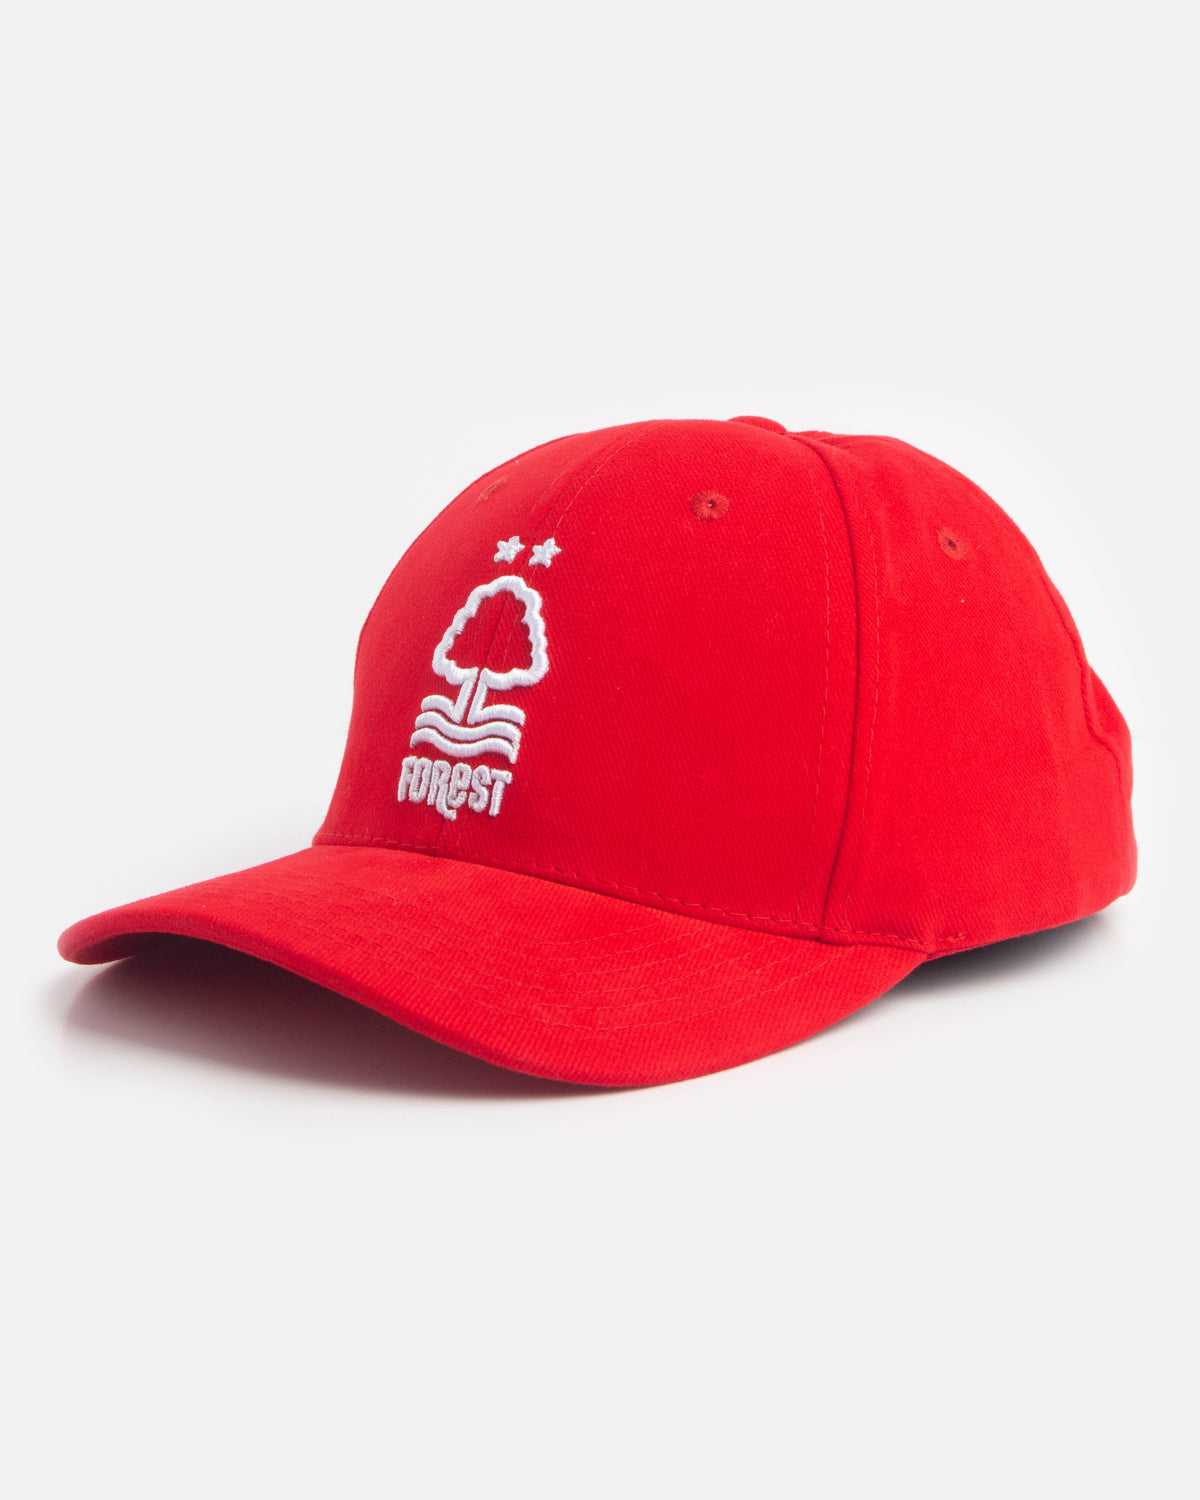 NFFC Red Structured Cap